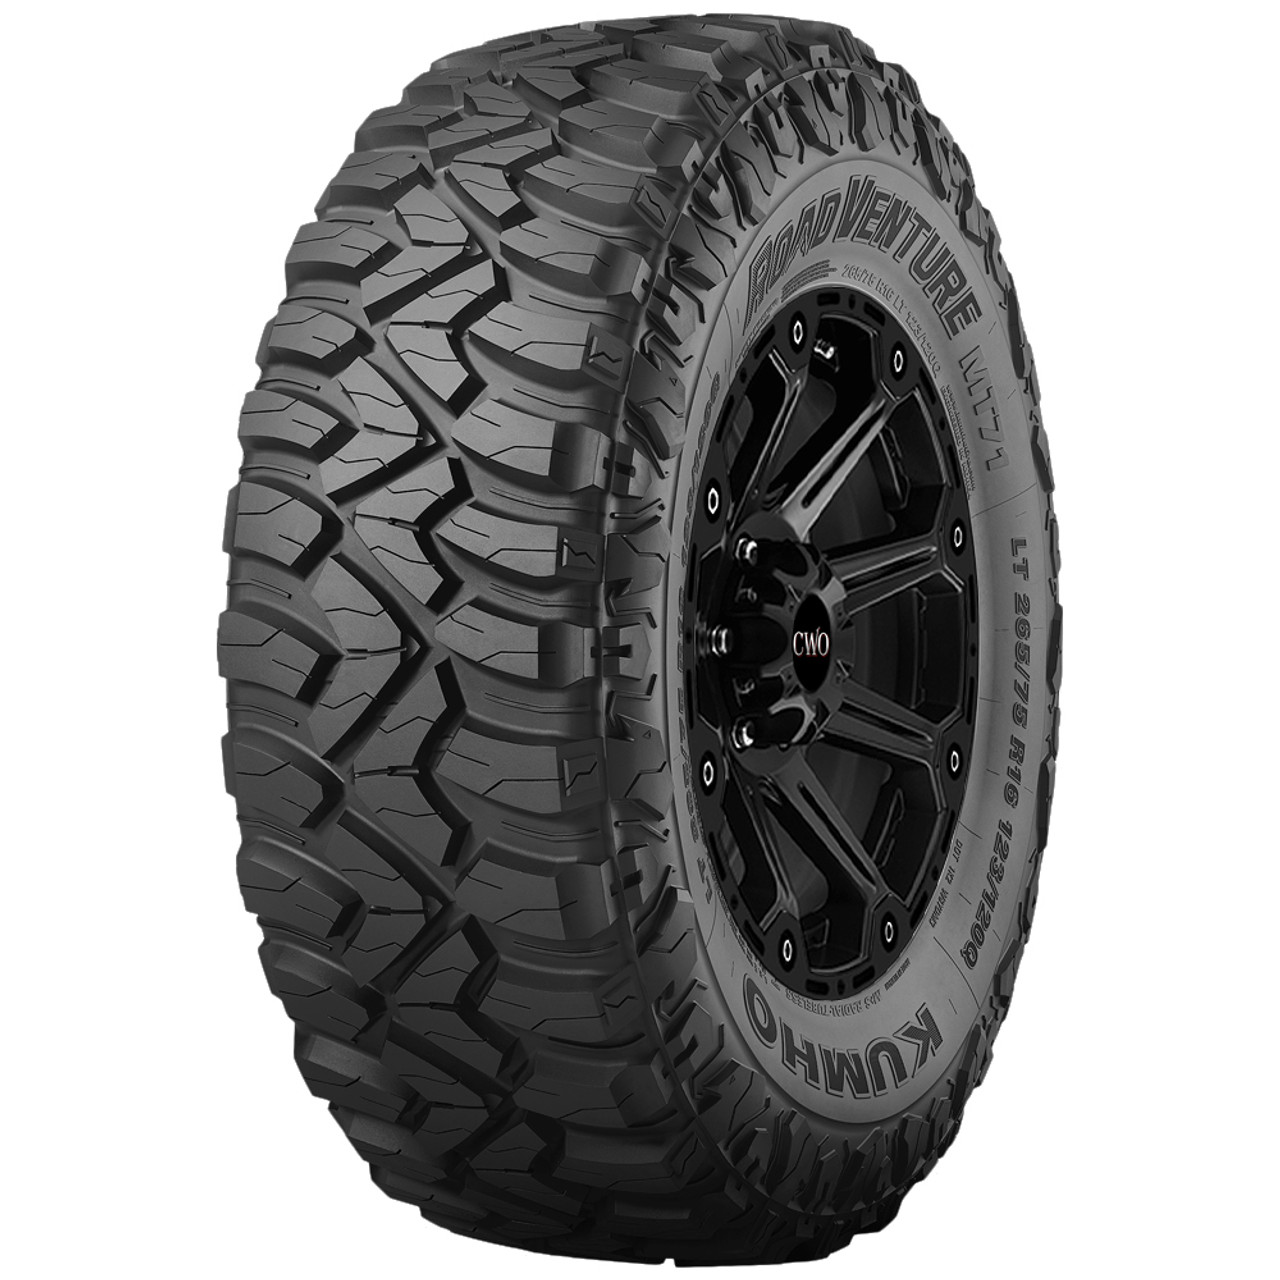 Gomme Nuove Kumho 205/80 R16C 110S ROAD VENTURE AT52 M+S pneumatici nuovi All Season